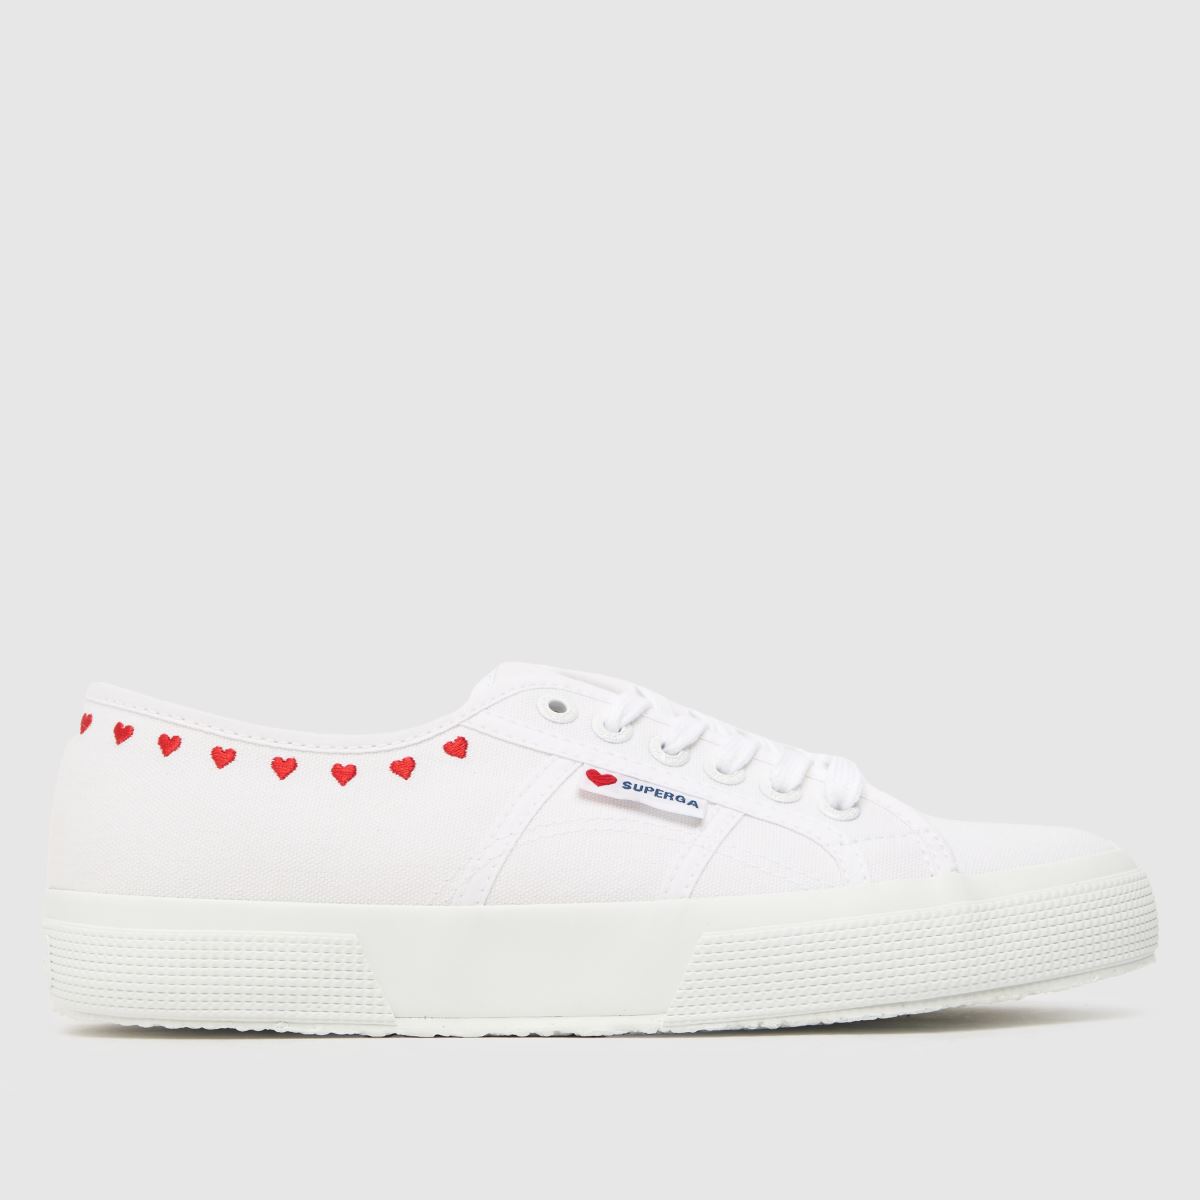 Superga 2750 little hearts trainers in white & red